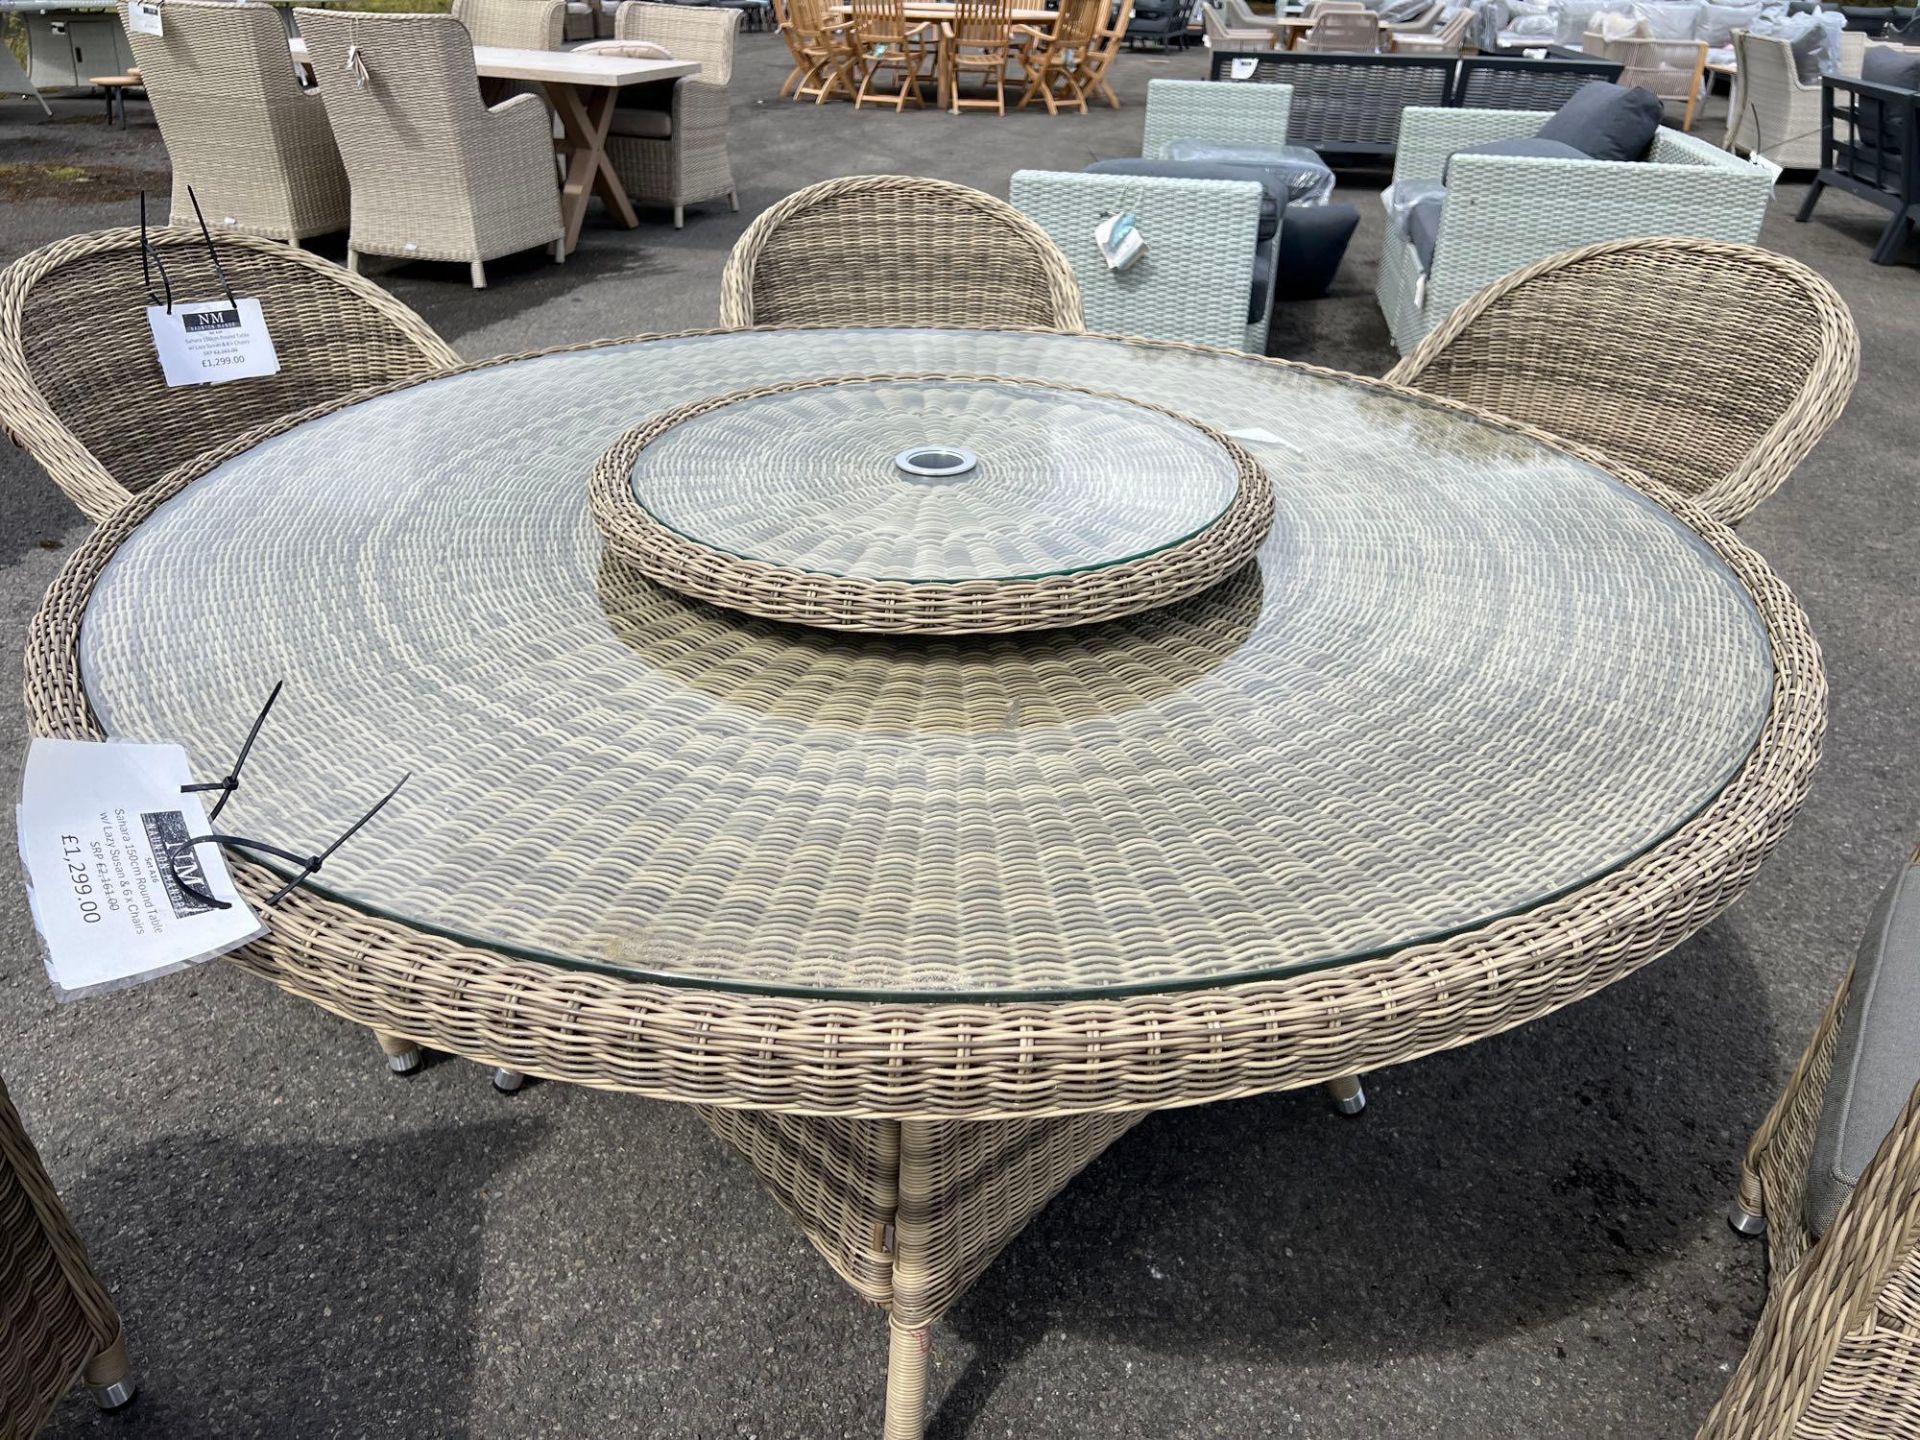 A16 Sahara 150cm Round Table With Lazy Susan and 6 x Chairs - Image 3 of 4